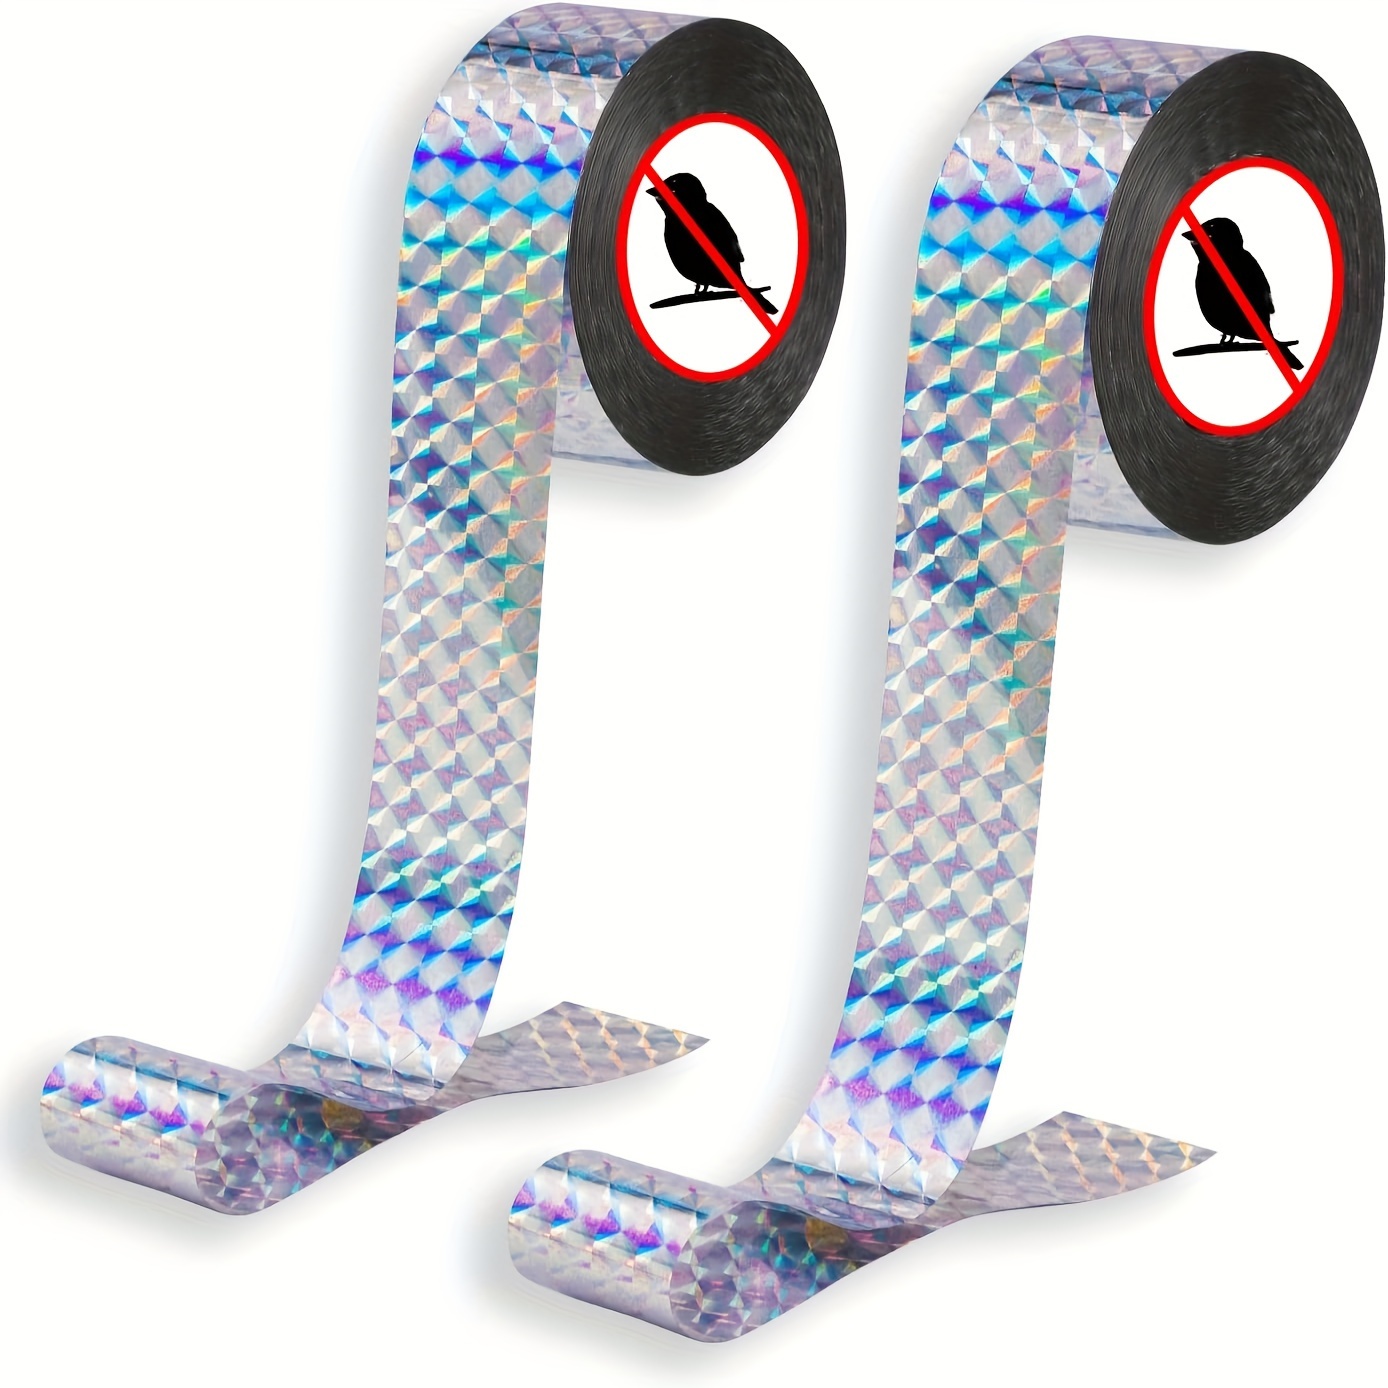 

Bird Deterrent Reflective Scare Tape - Double-sided Repellent Ribbon, 2 Rolls, 2.4cm X 50m Each, Outdoor Use For Gardens, Farms, Orchards, Non-sticky Plastic Material, Keep Birds And Wildlife Away.